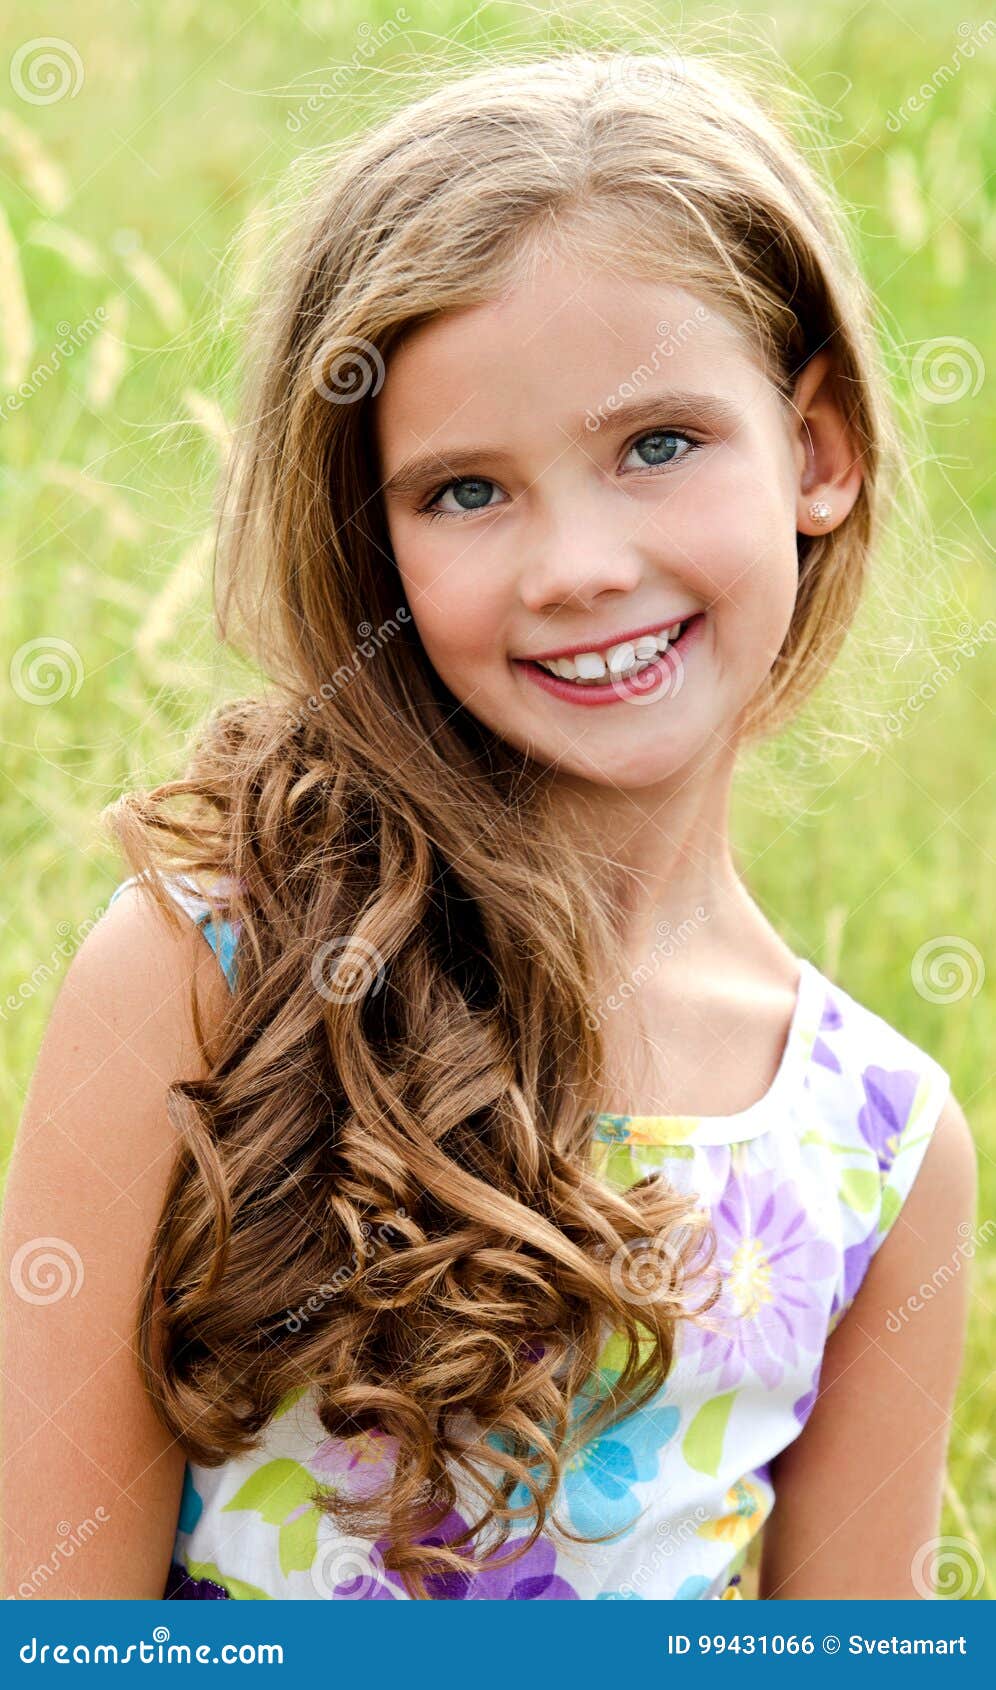 Portrait of Adorable Smiling Little Girl Child in Dress Outdoor Stock ...